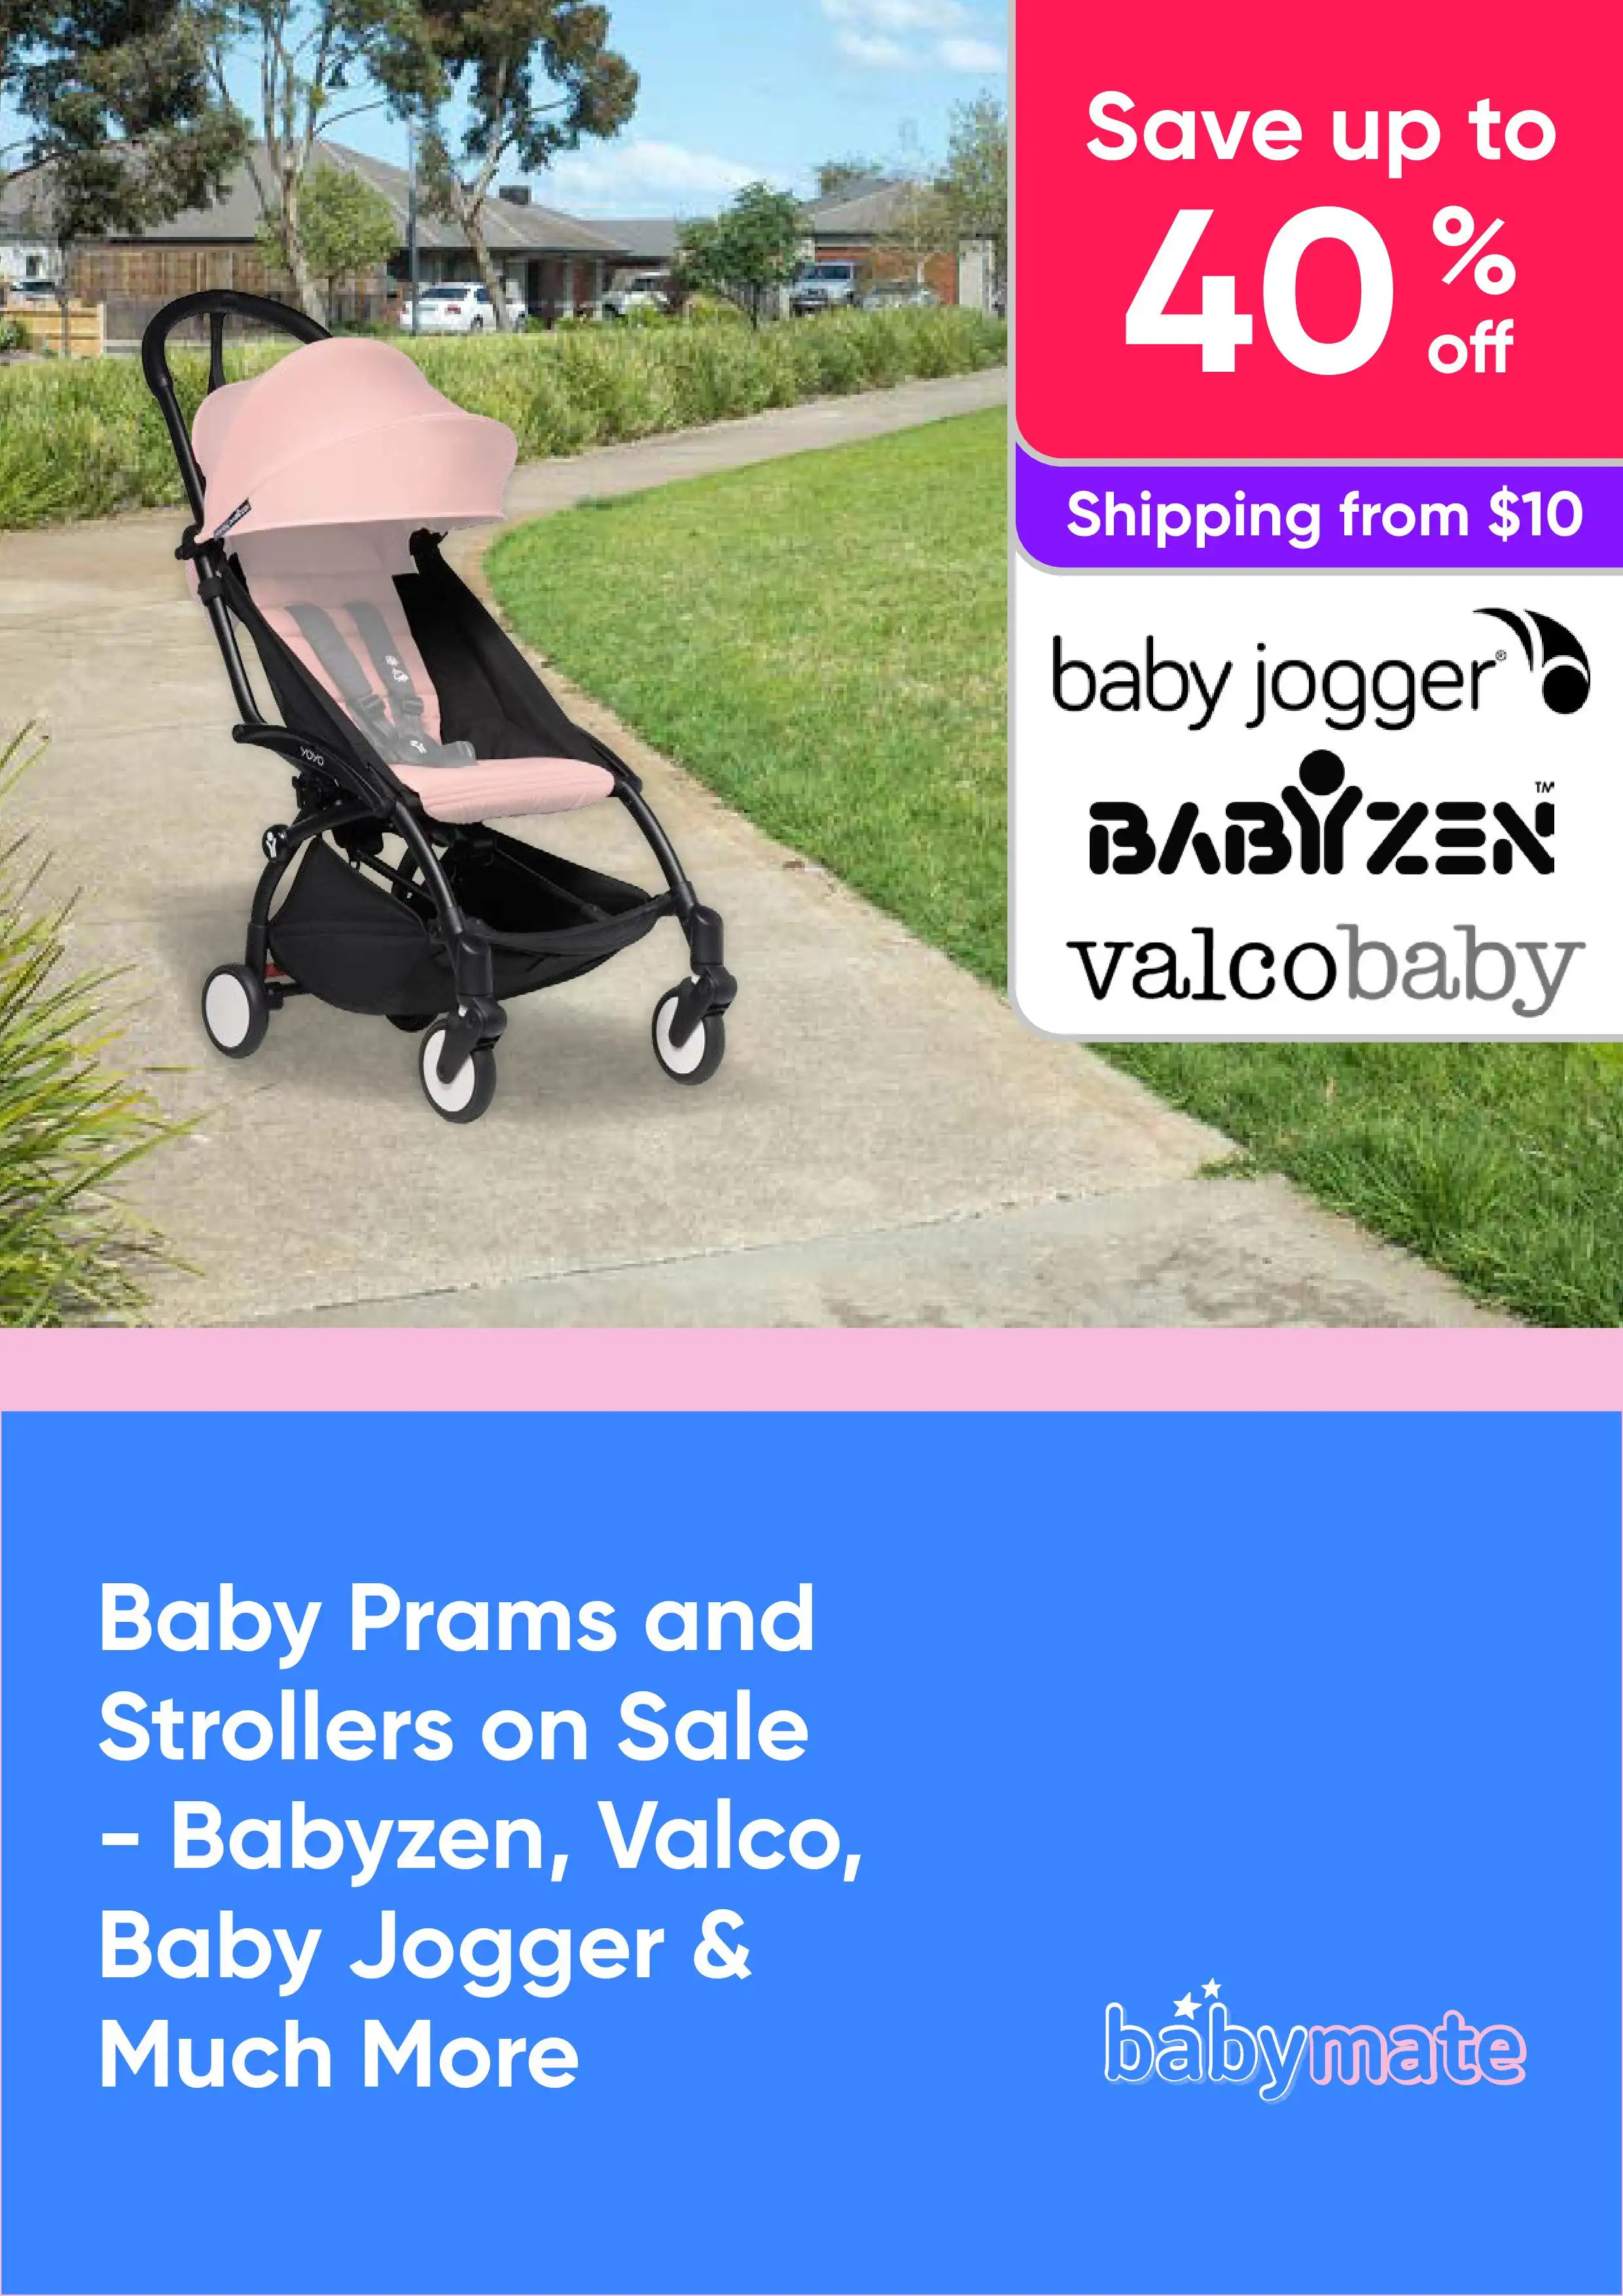 Baby Prams and Strollers on Sale - Save Up to 40% on Babyzen, Valco, Baby Jogger